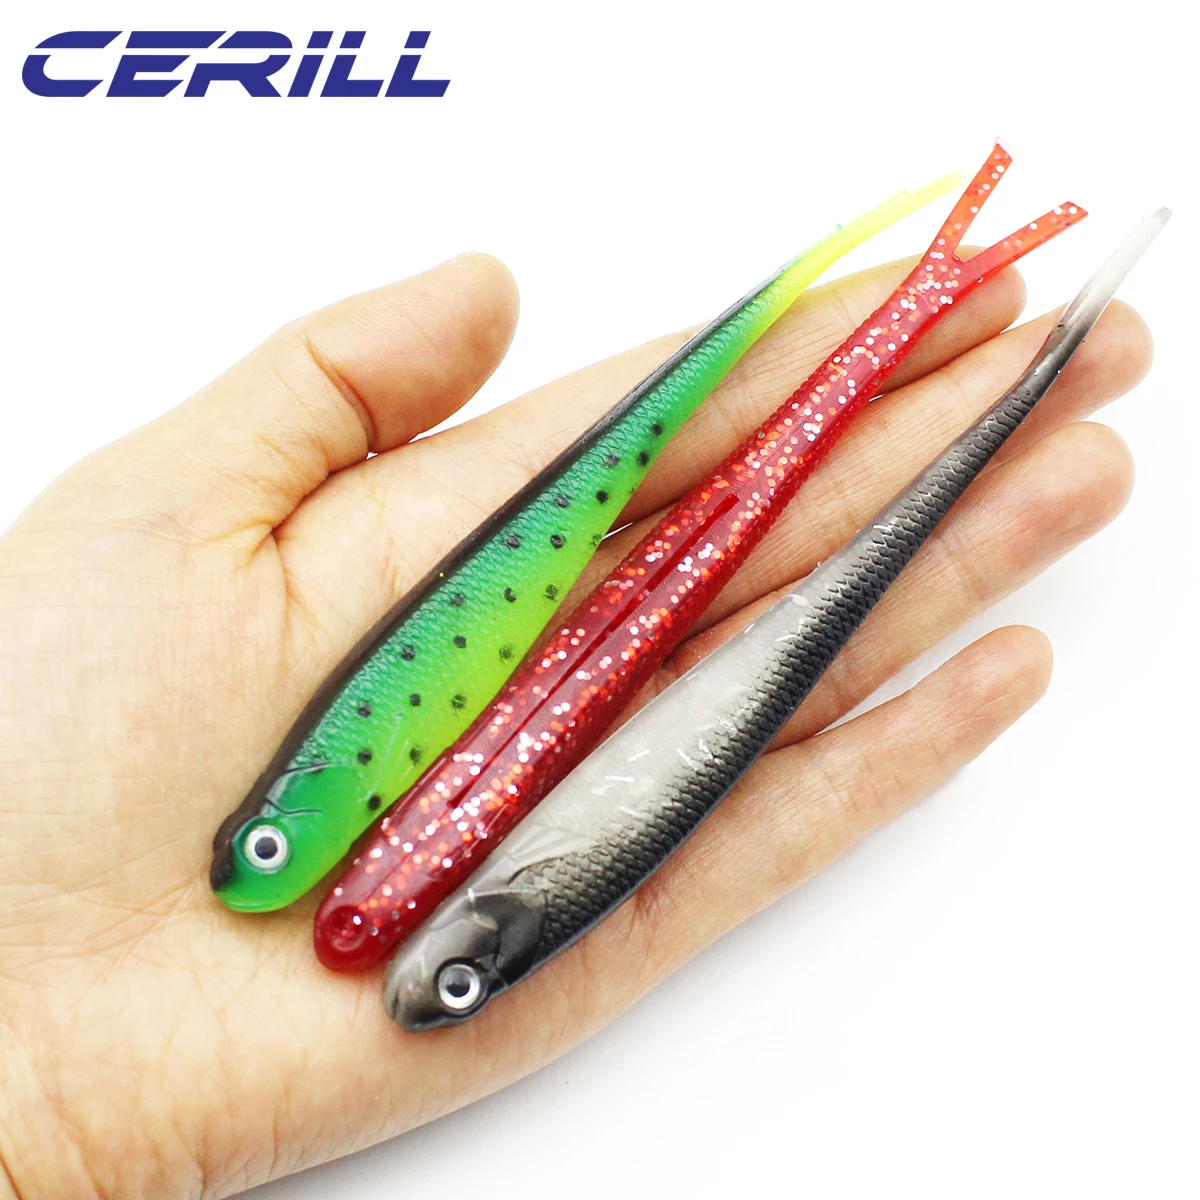 

Cerill 5 PCS Fork Tail Soft Fishing Lure Lifelike Wobblers Artificial Worm Bait Silicone Shad Trout Carp Bass Swimbait Tackle